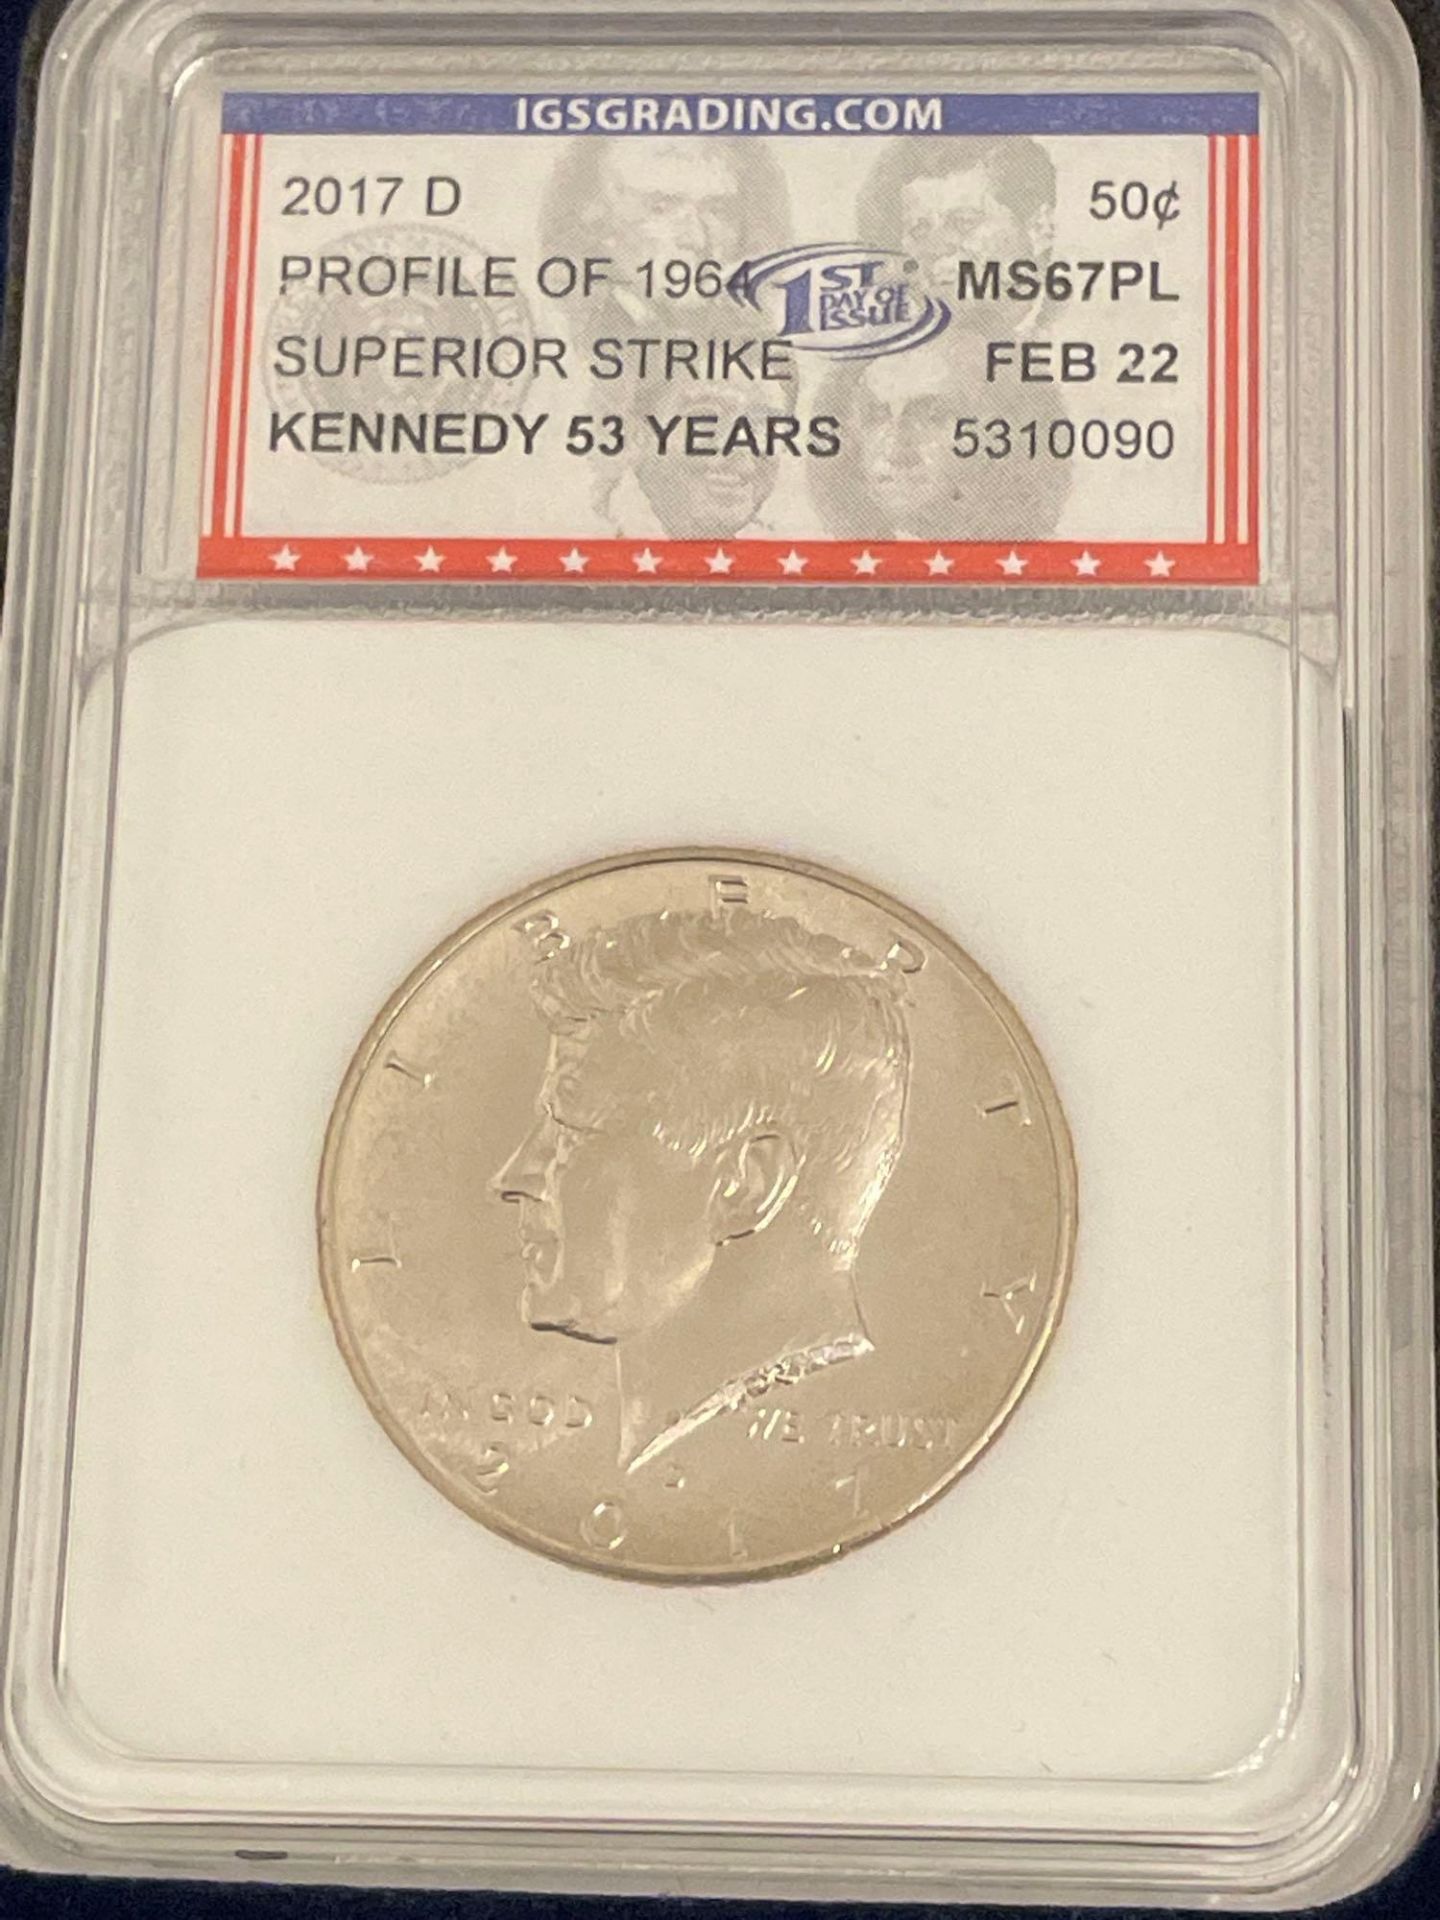 Two 2017 Profile of 1964 Superior Strike Kennedy Half Dollars - Image 3 of 4